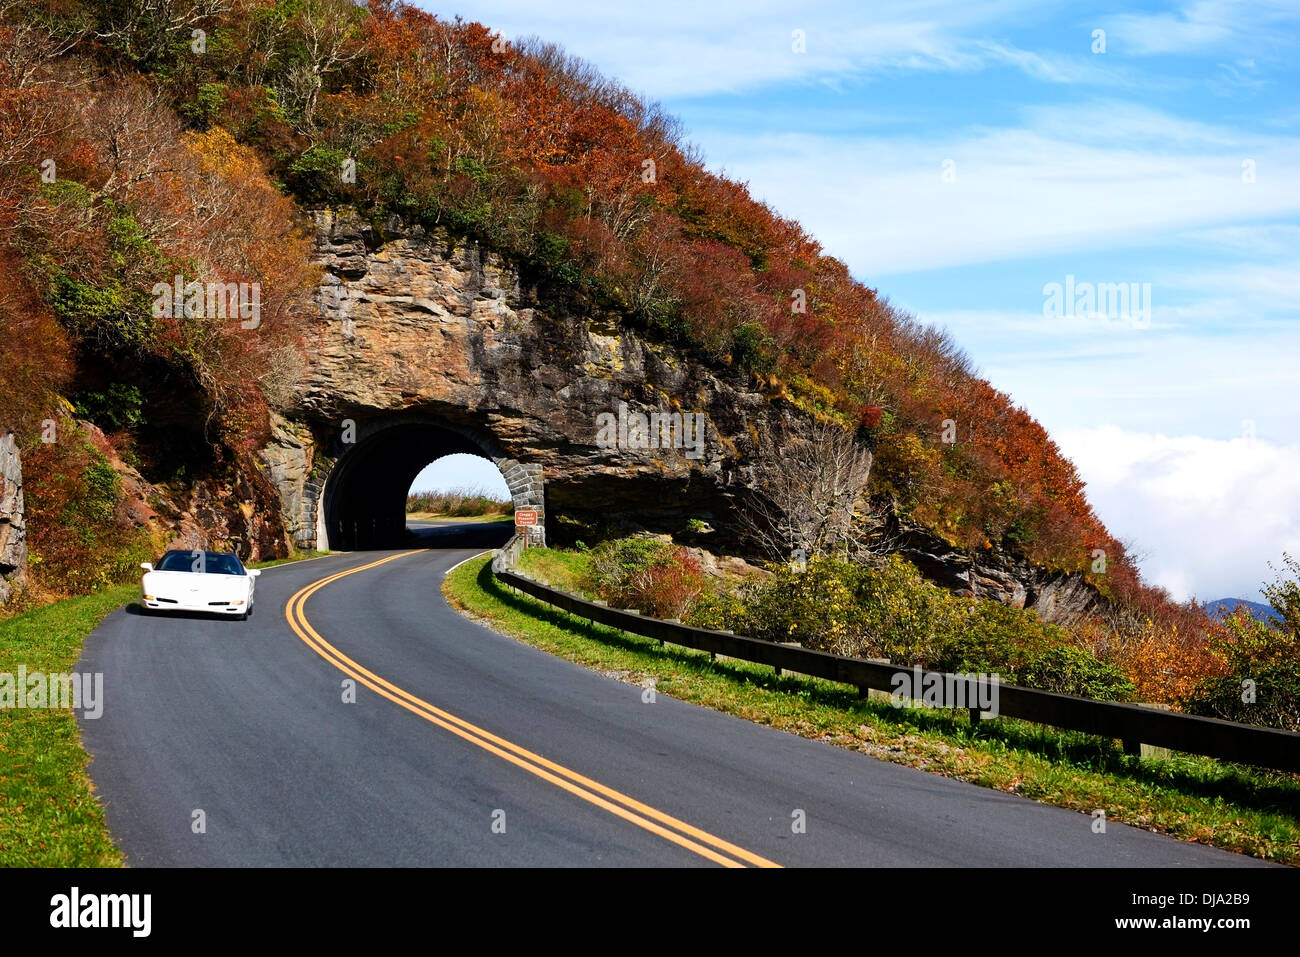 A traveler in a sports car passes through the Craggy Pinnacle Tunnel on the Blue Ridge Parkway near Asheville North Carolina. Stock Photo